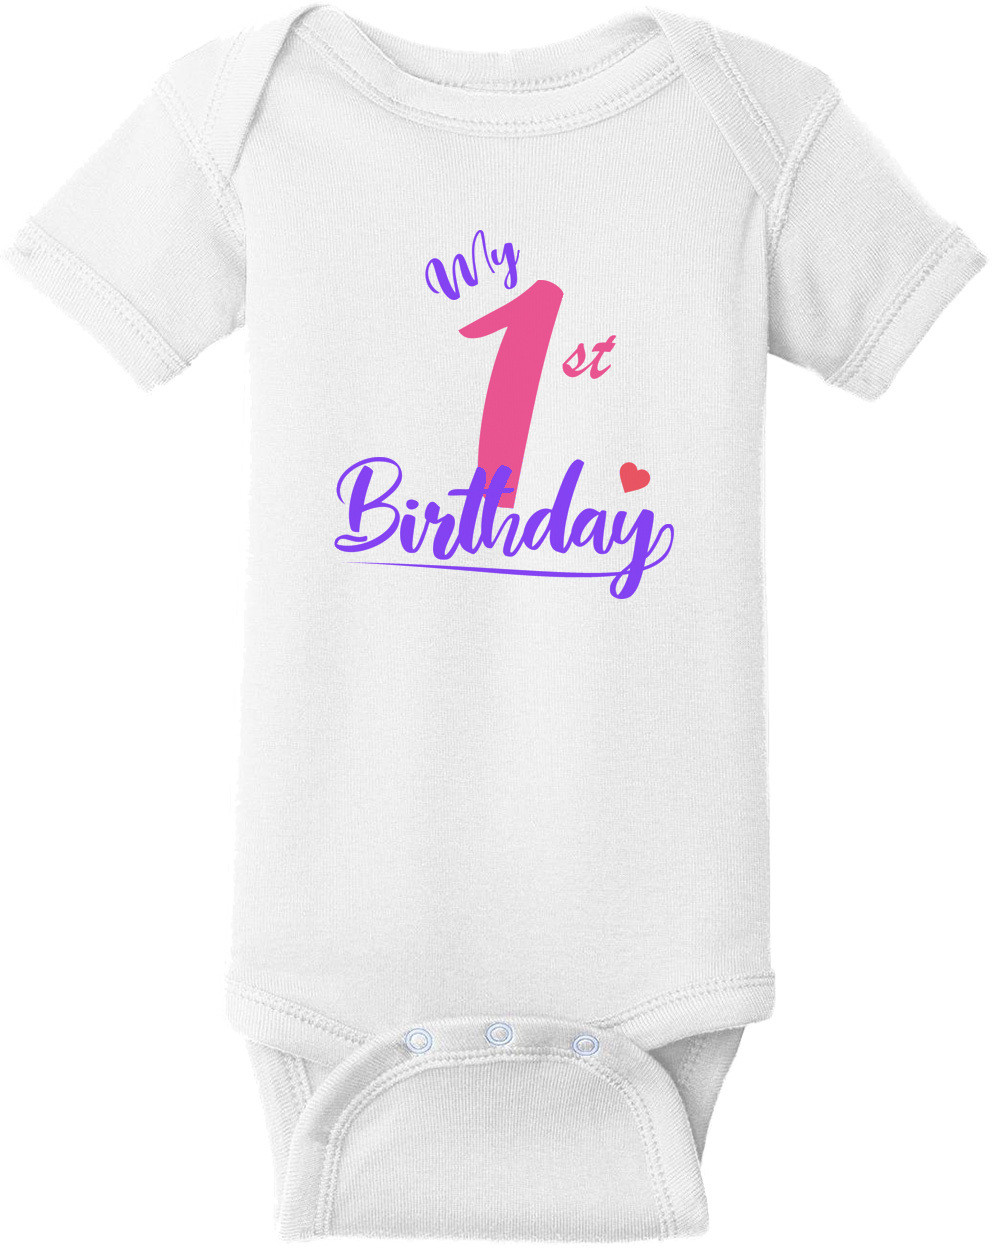 My first birthday - girl's birthday. Personalized t-shirt with your child's age.